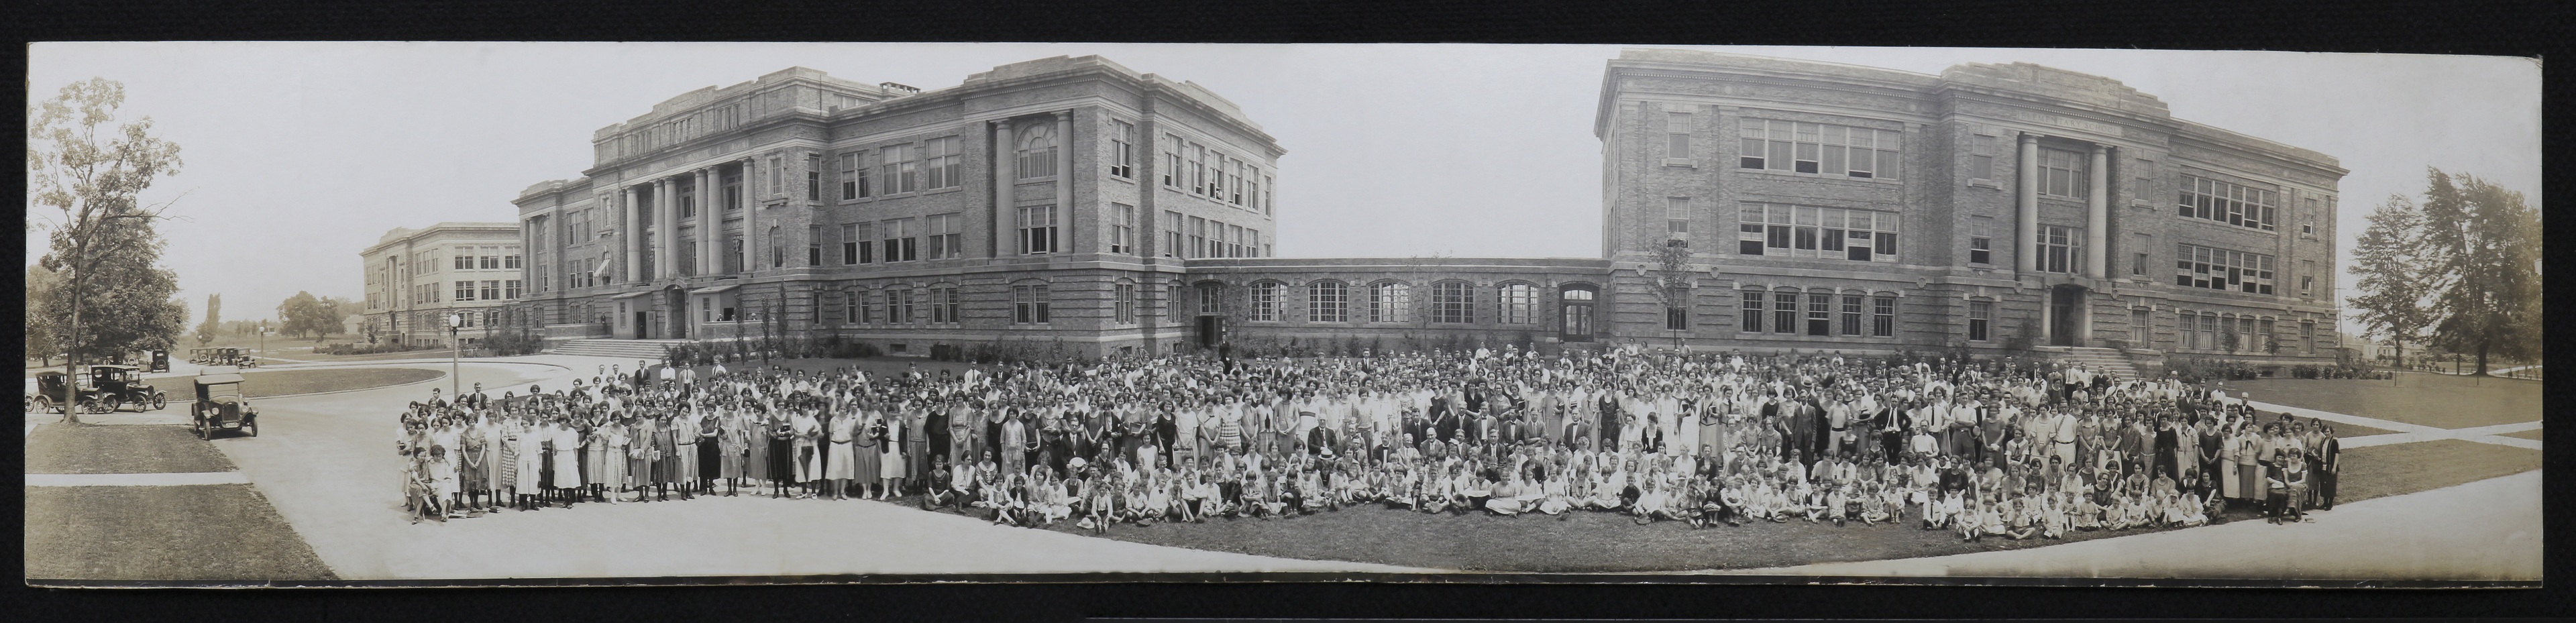  The Elementary School was the backdrop for a group photo in the 1920s.